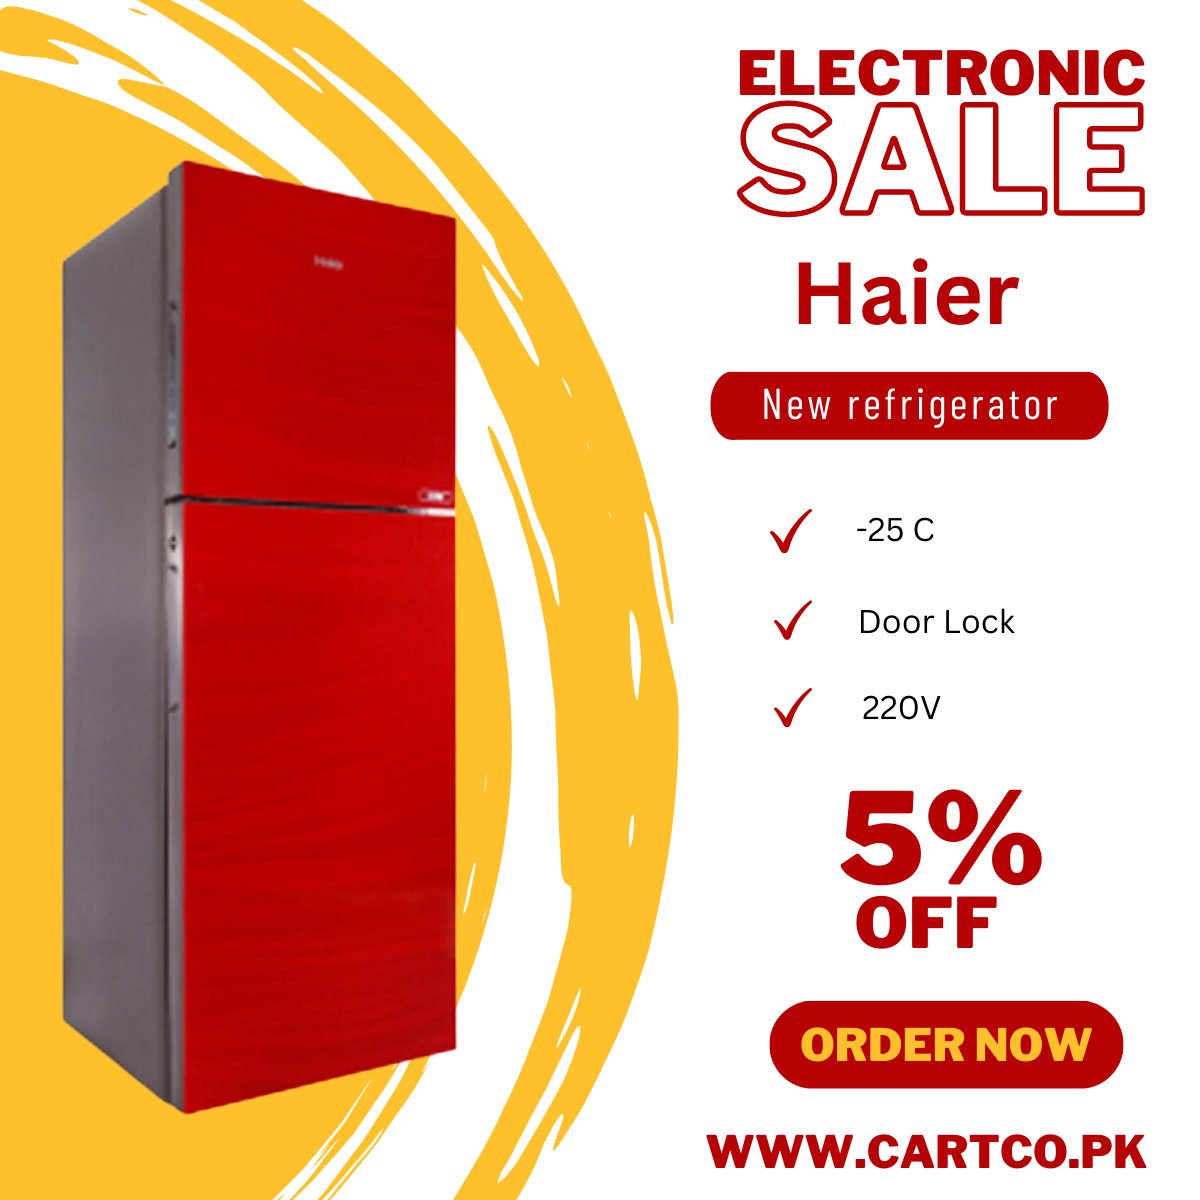 'Introducing the Haier E-Star Refrigerator - Your perfect cooling companion! Say goodbye to high energy bills with its eco-friendly design and advanced cooling technology.
Order Now and Get Discount : bit.ly/3O971N6

#Cartco #Haier #EStarRefrigerator #CoolingInnovation